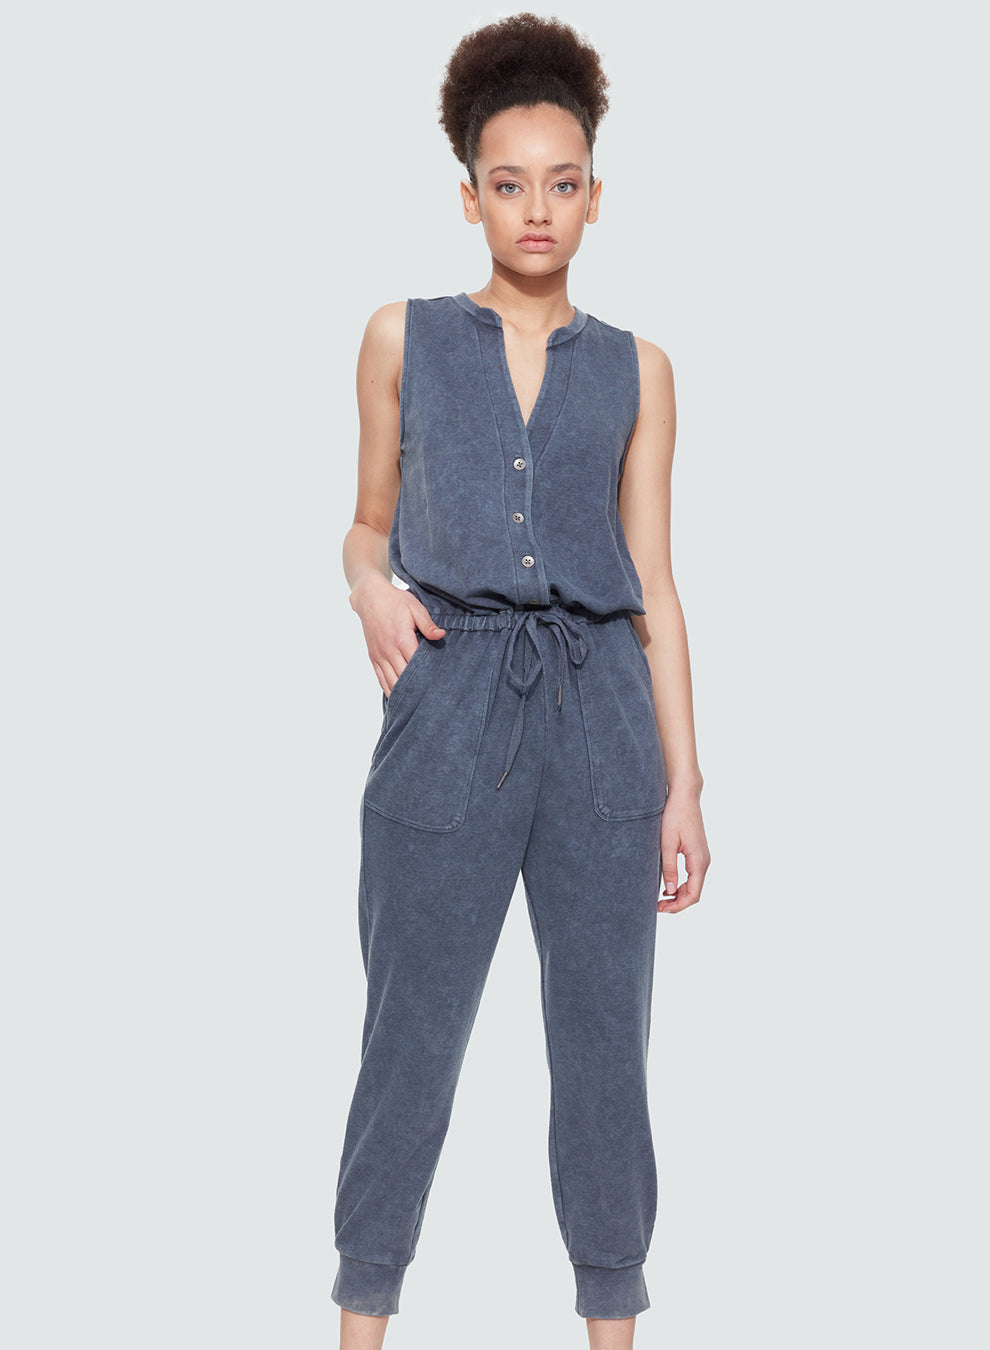 PLUS Briana Washed Navy Jumpsuit